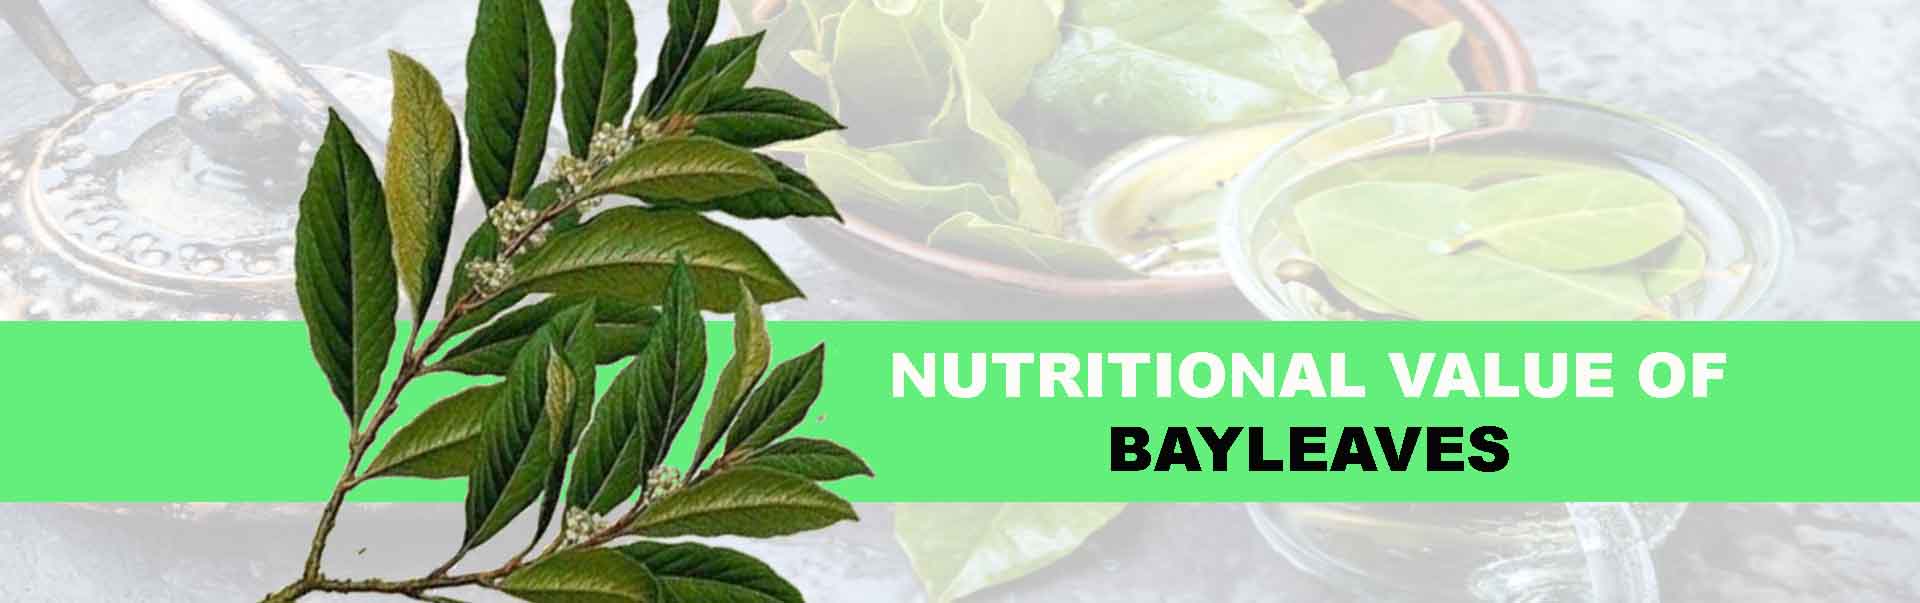 Bay Leaves Help to Reduce Inflemation